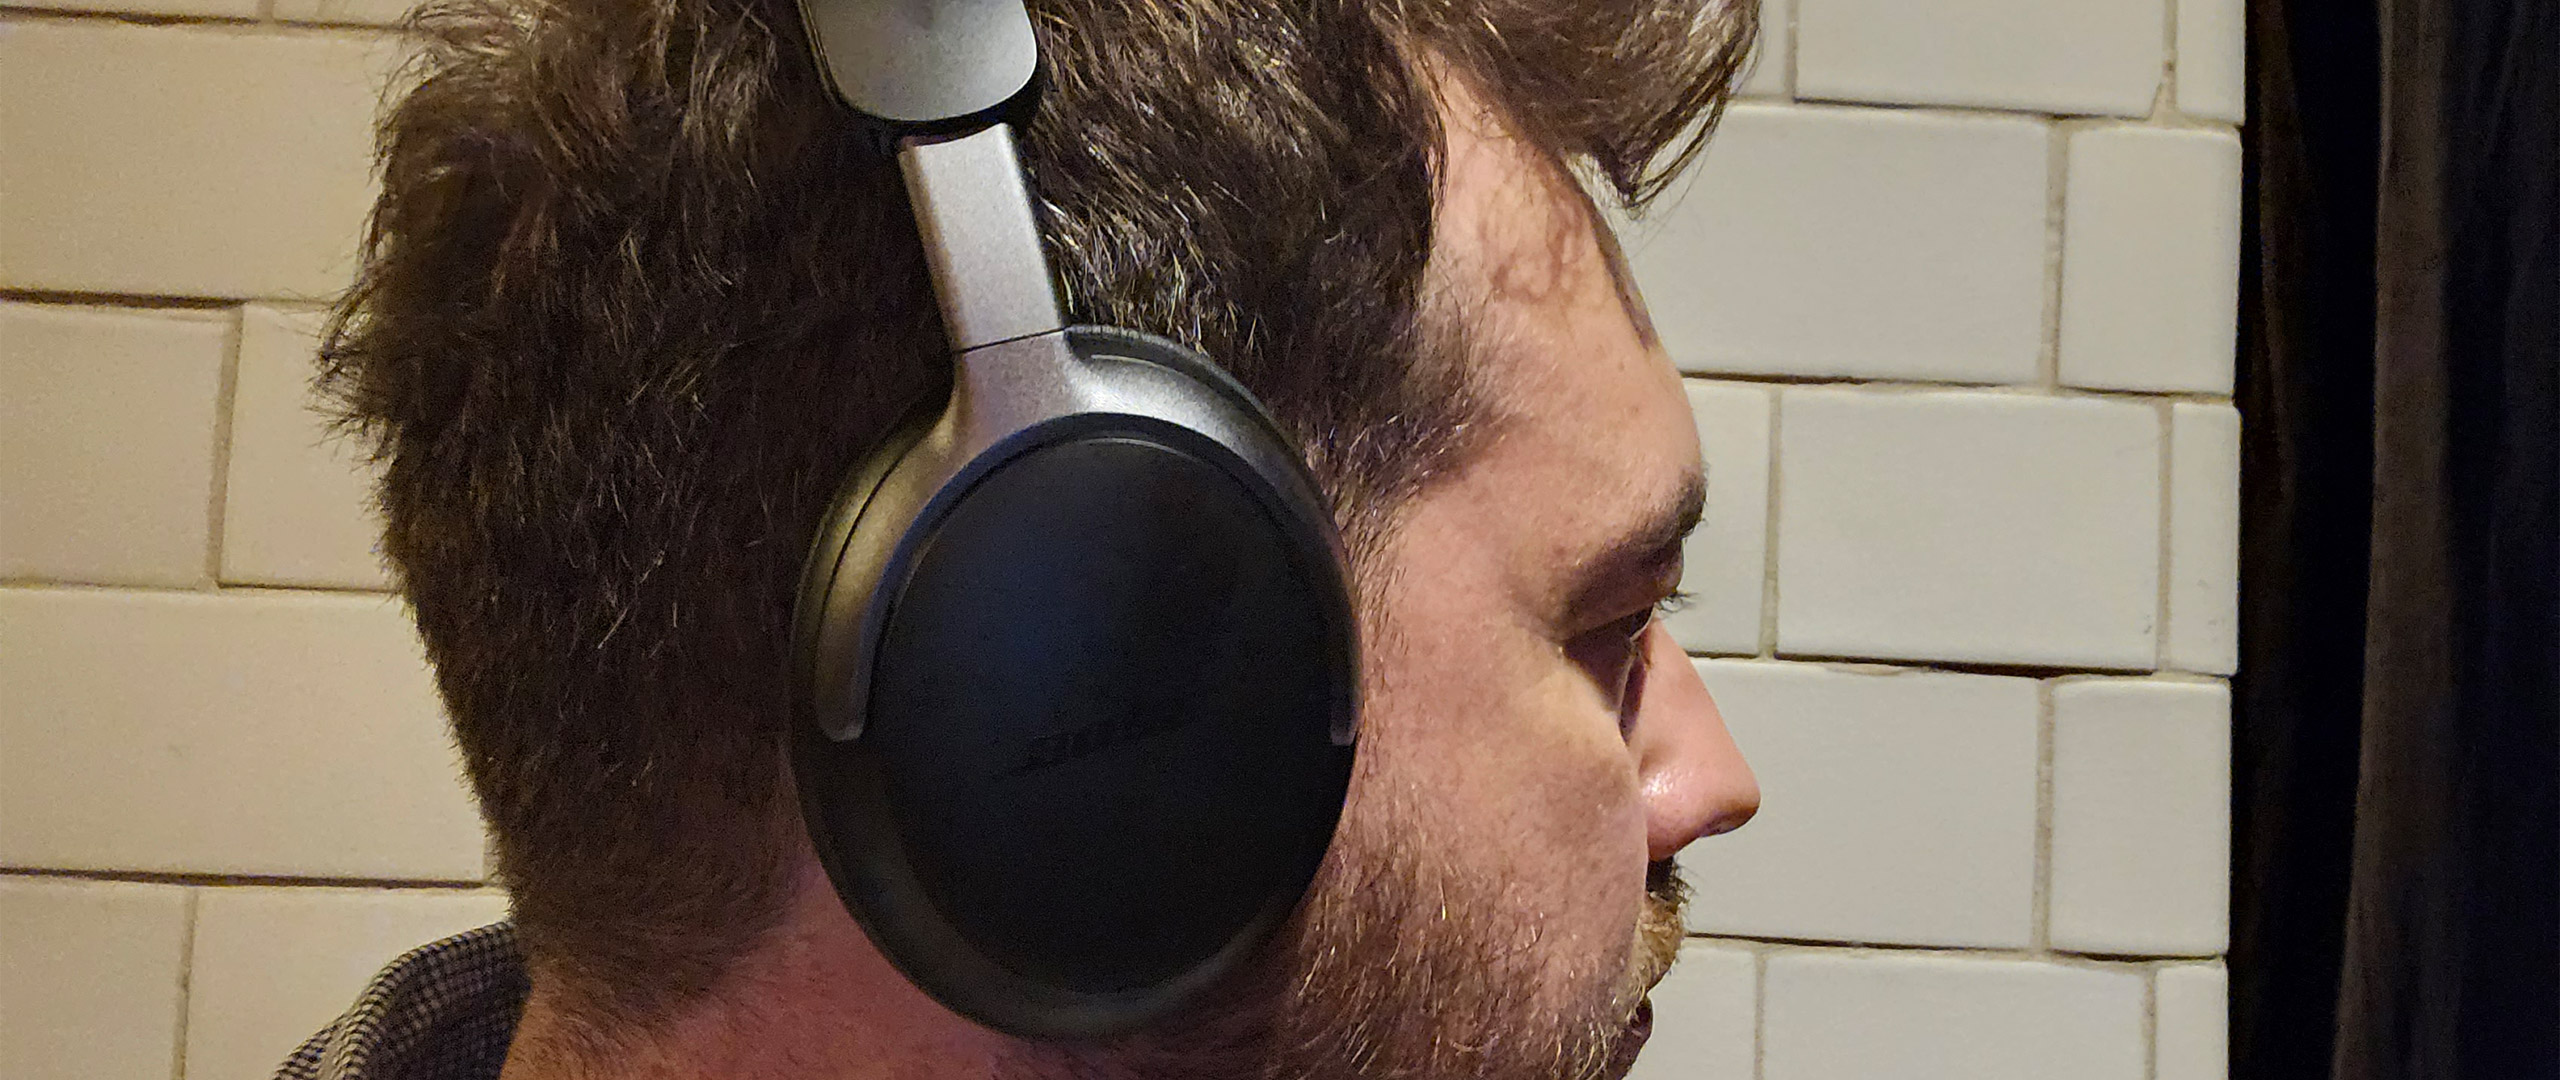 the Ultra ANC away me me and blew | showed TechRadar the Headphones QuietComfort Bose